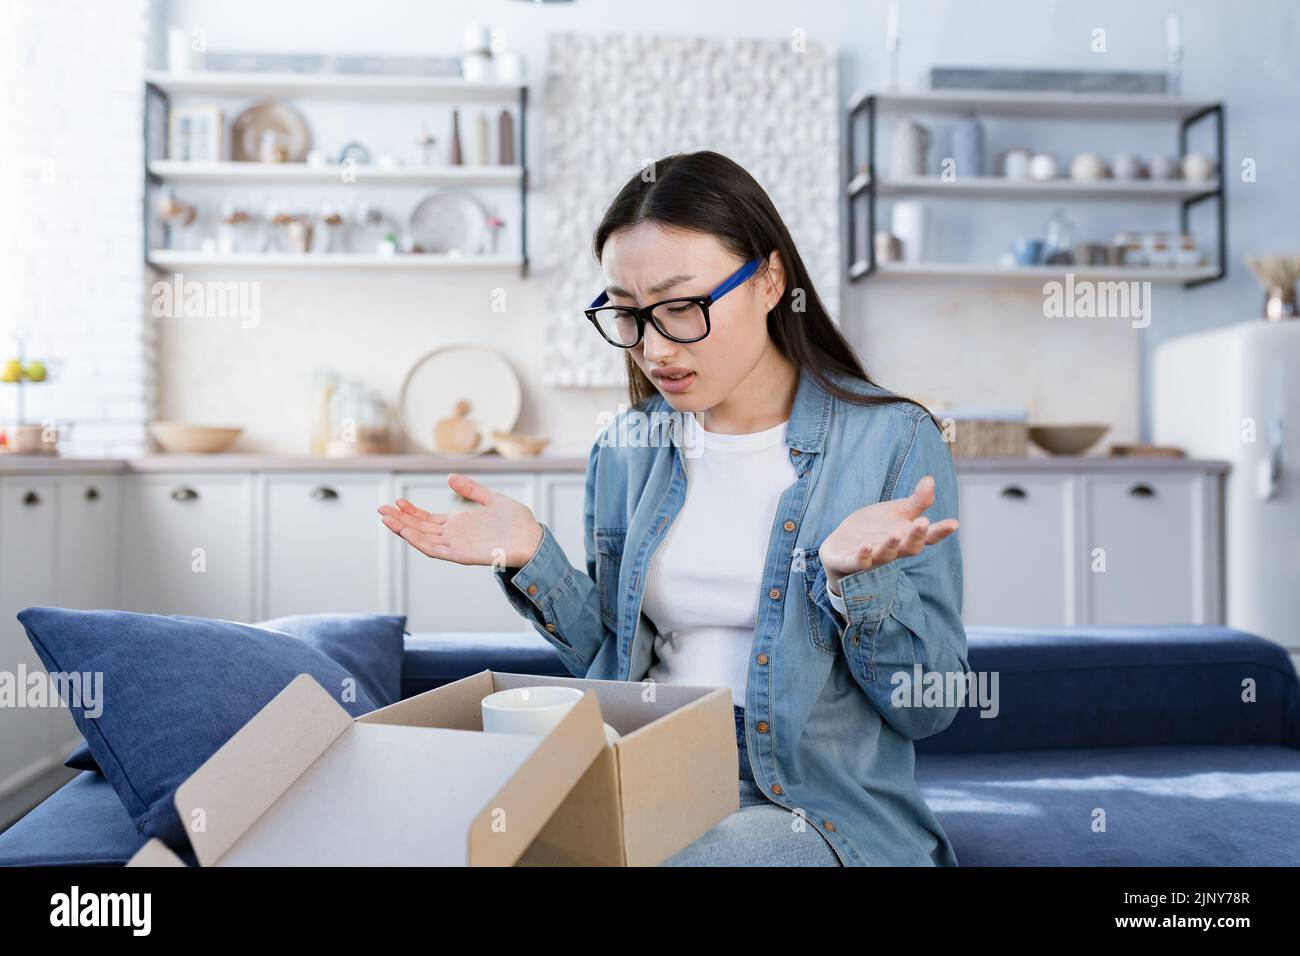 Disappointed woman buyer at home, Asian woman received wrong parcel and damaged product from online store, teenage girl in glasses upset sitting on sofa Stock Photo